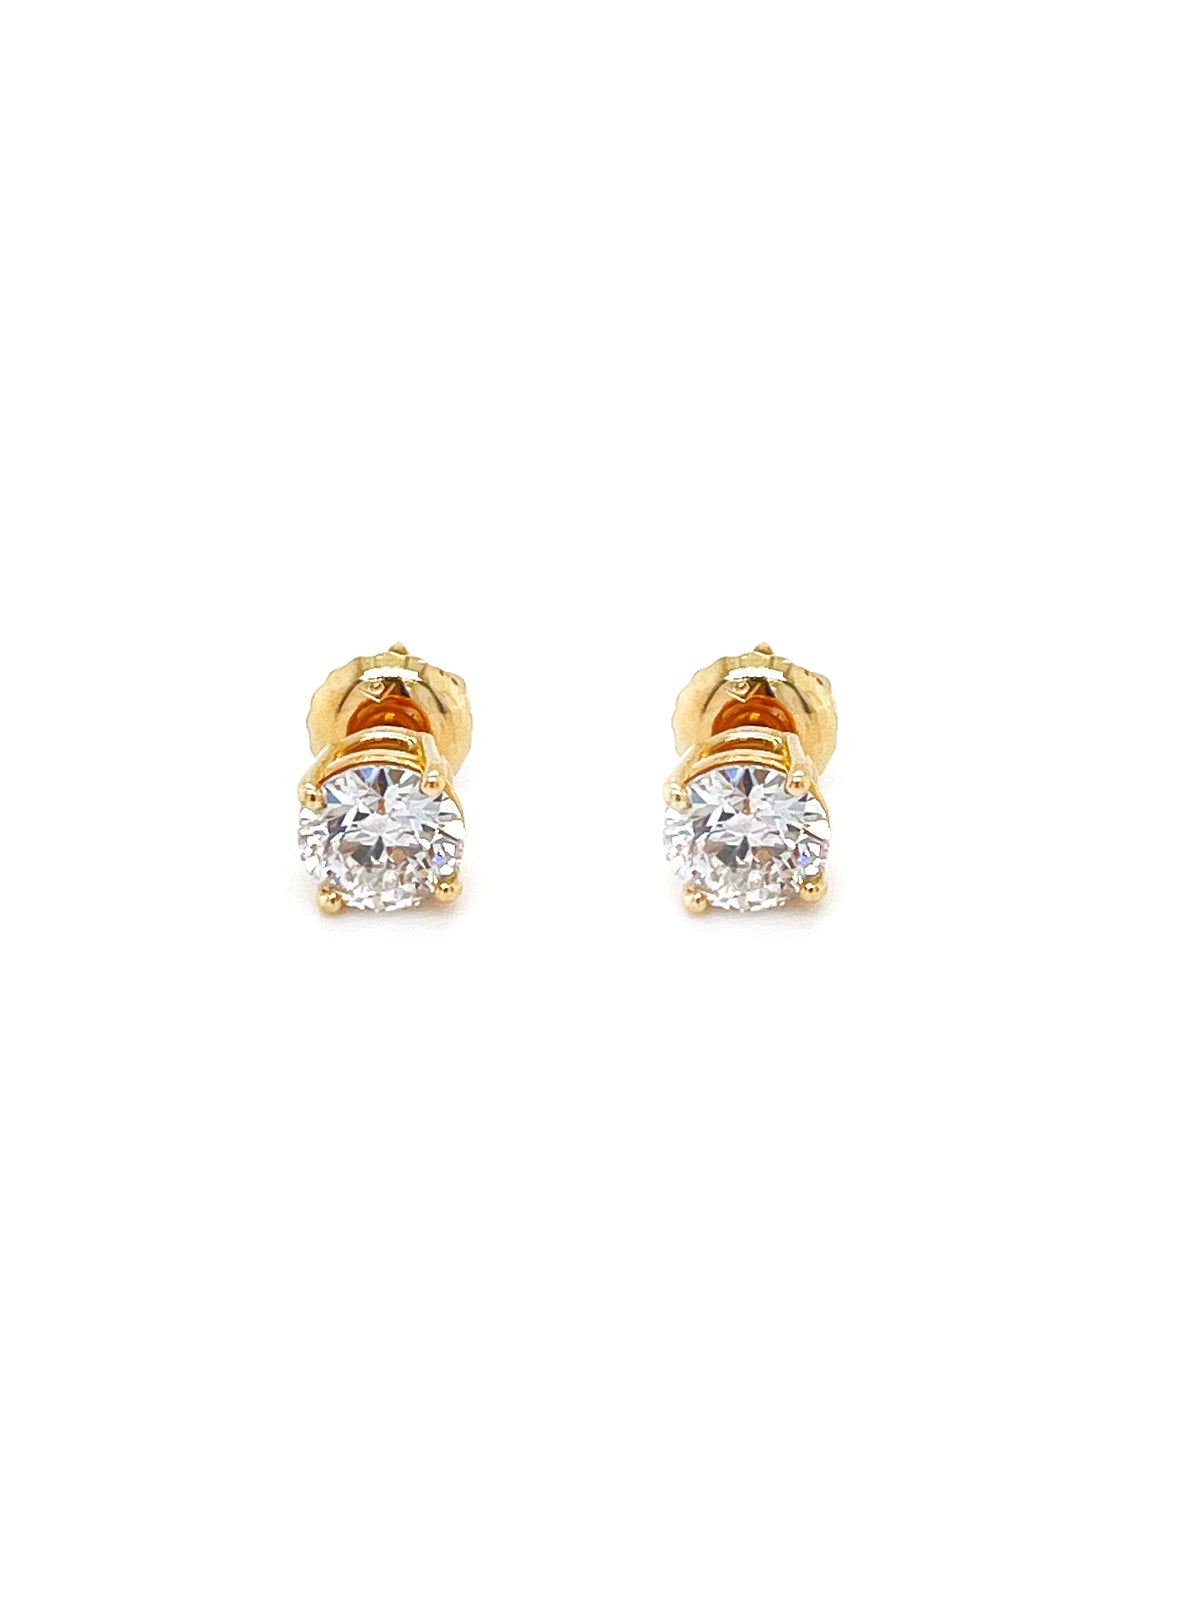 14K Yellow Gold 1.04CT Lab Grown Diamond Solitaire Earrings